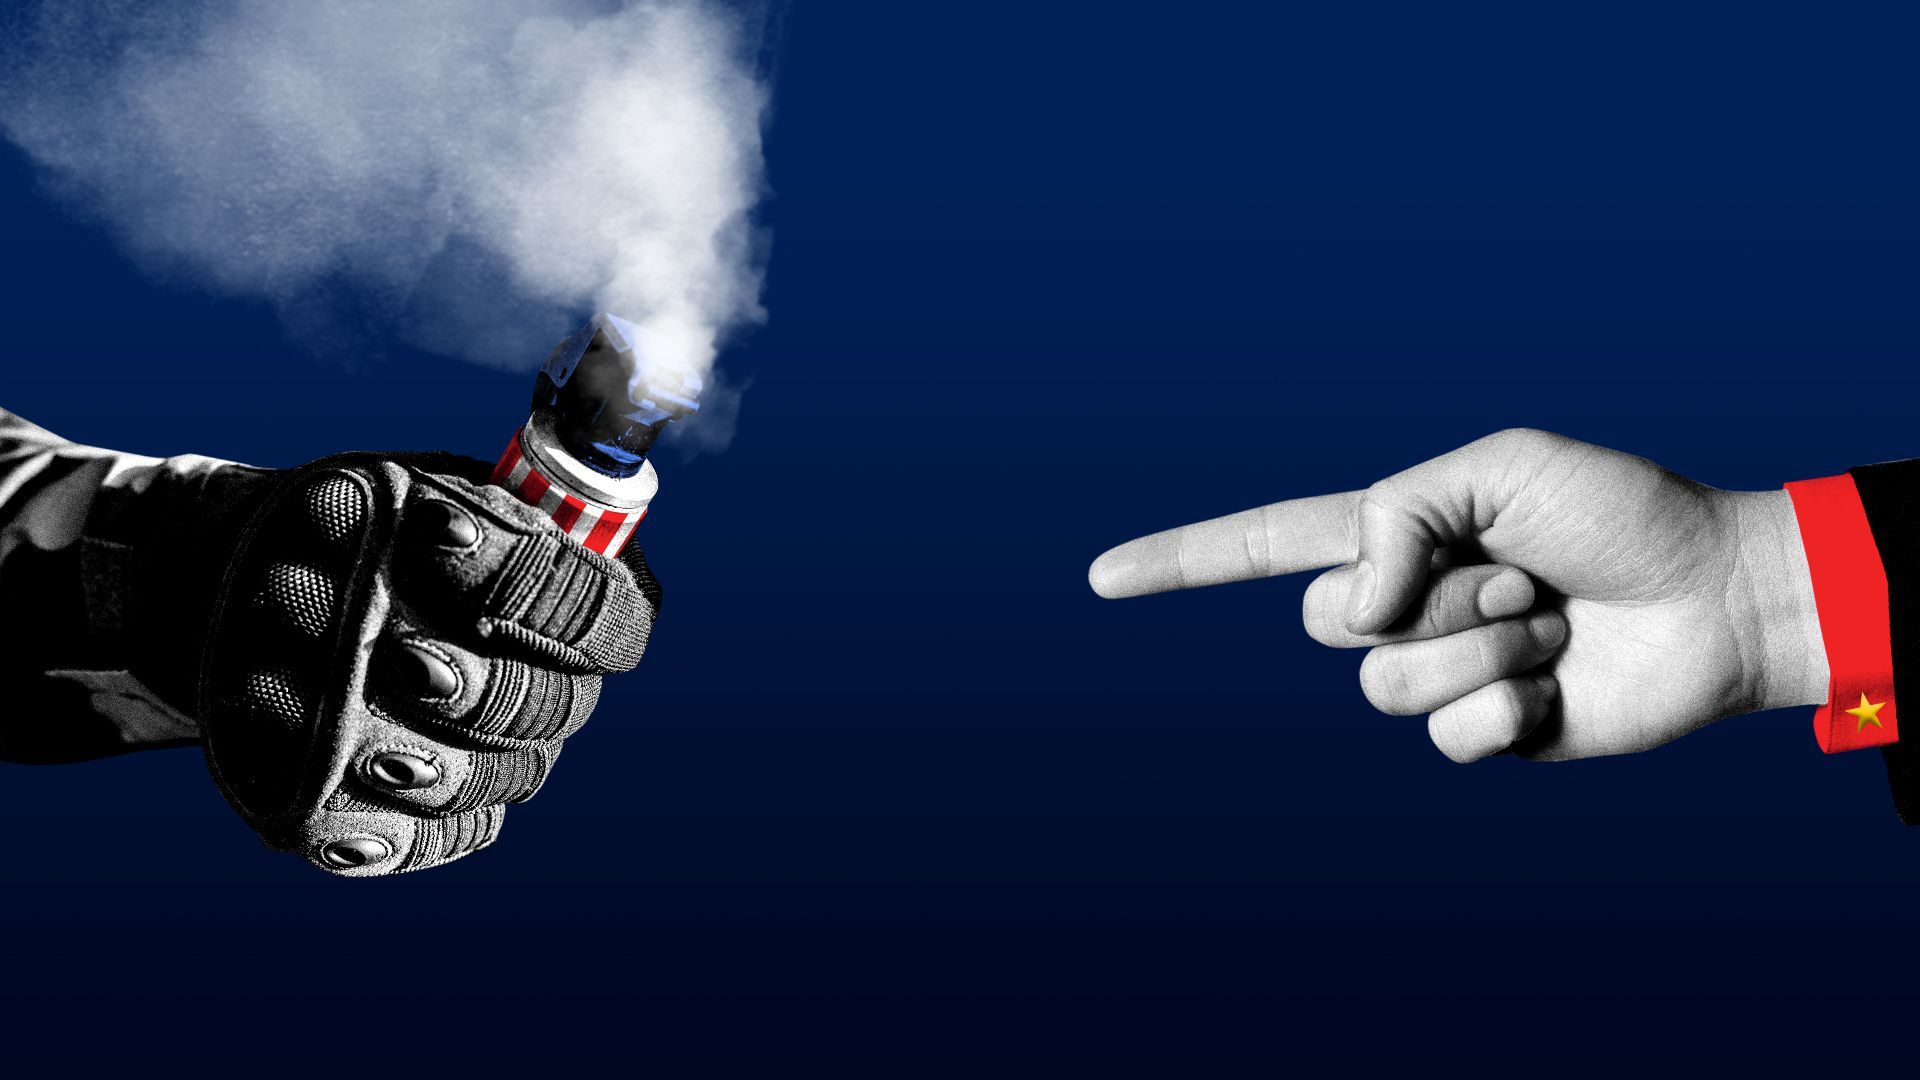 Illustration of a hand holding a tear gas canister with stars and stripes, with another hand wearing the Chinese star pointing at it.